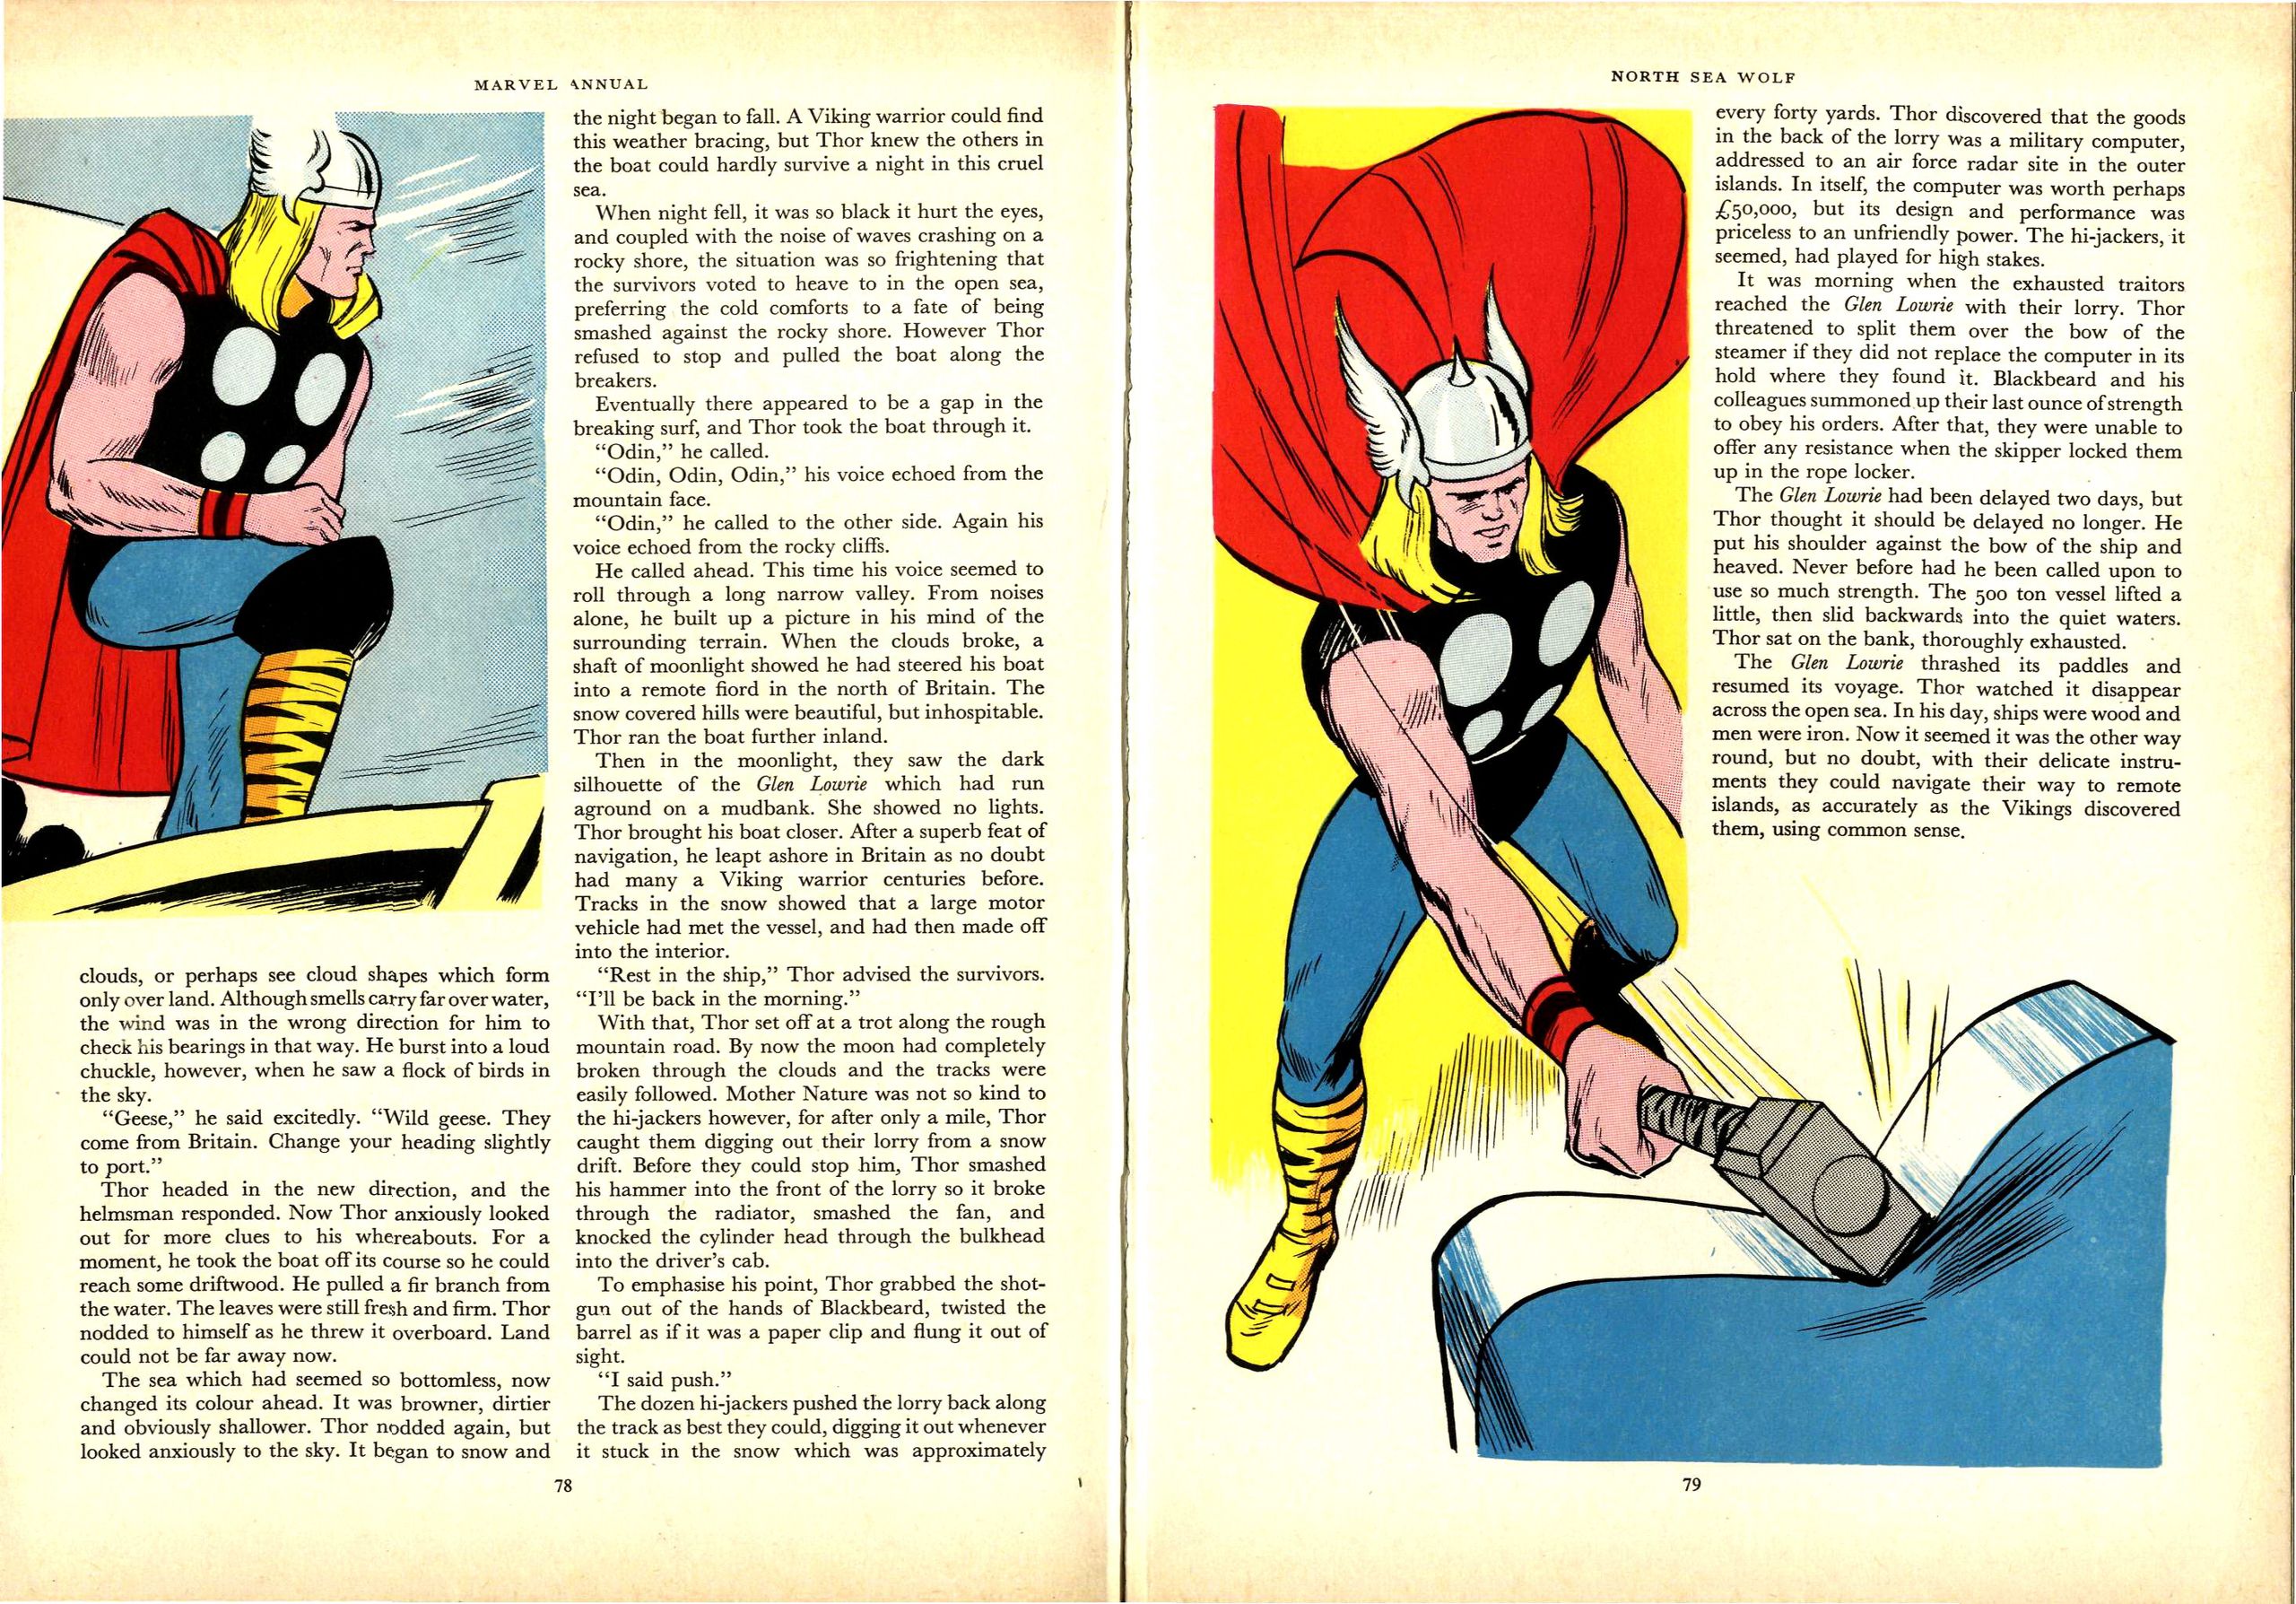 Read online Marvel Annual comic -  Issue #1967 - 40